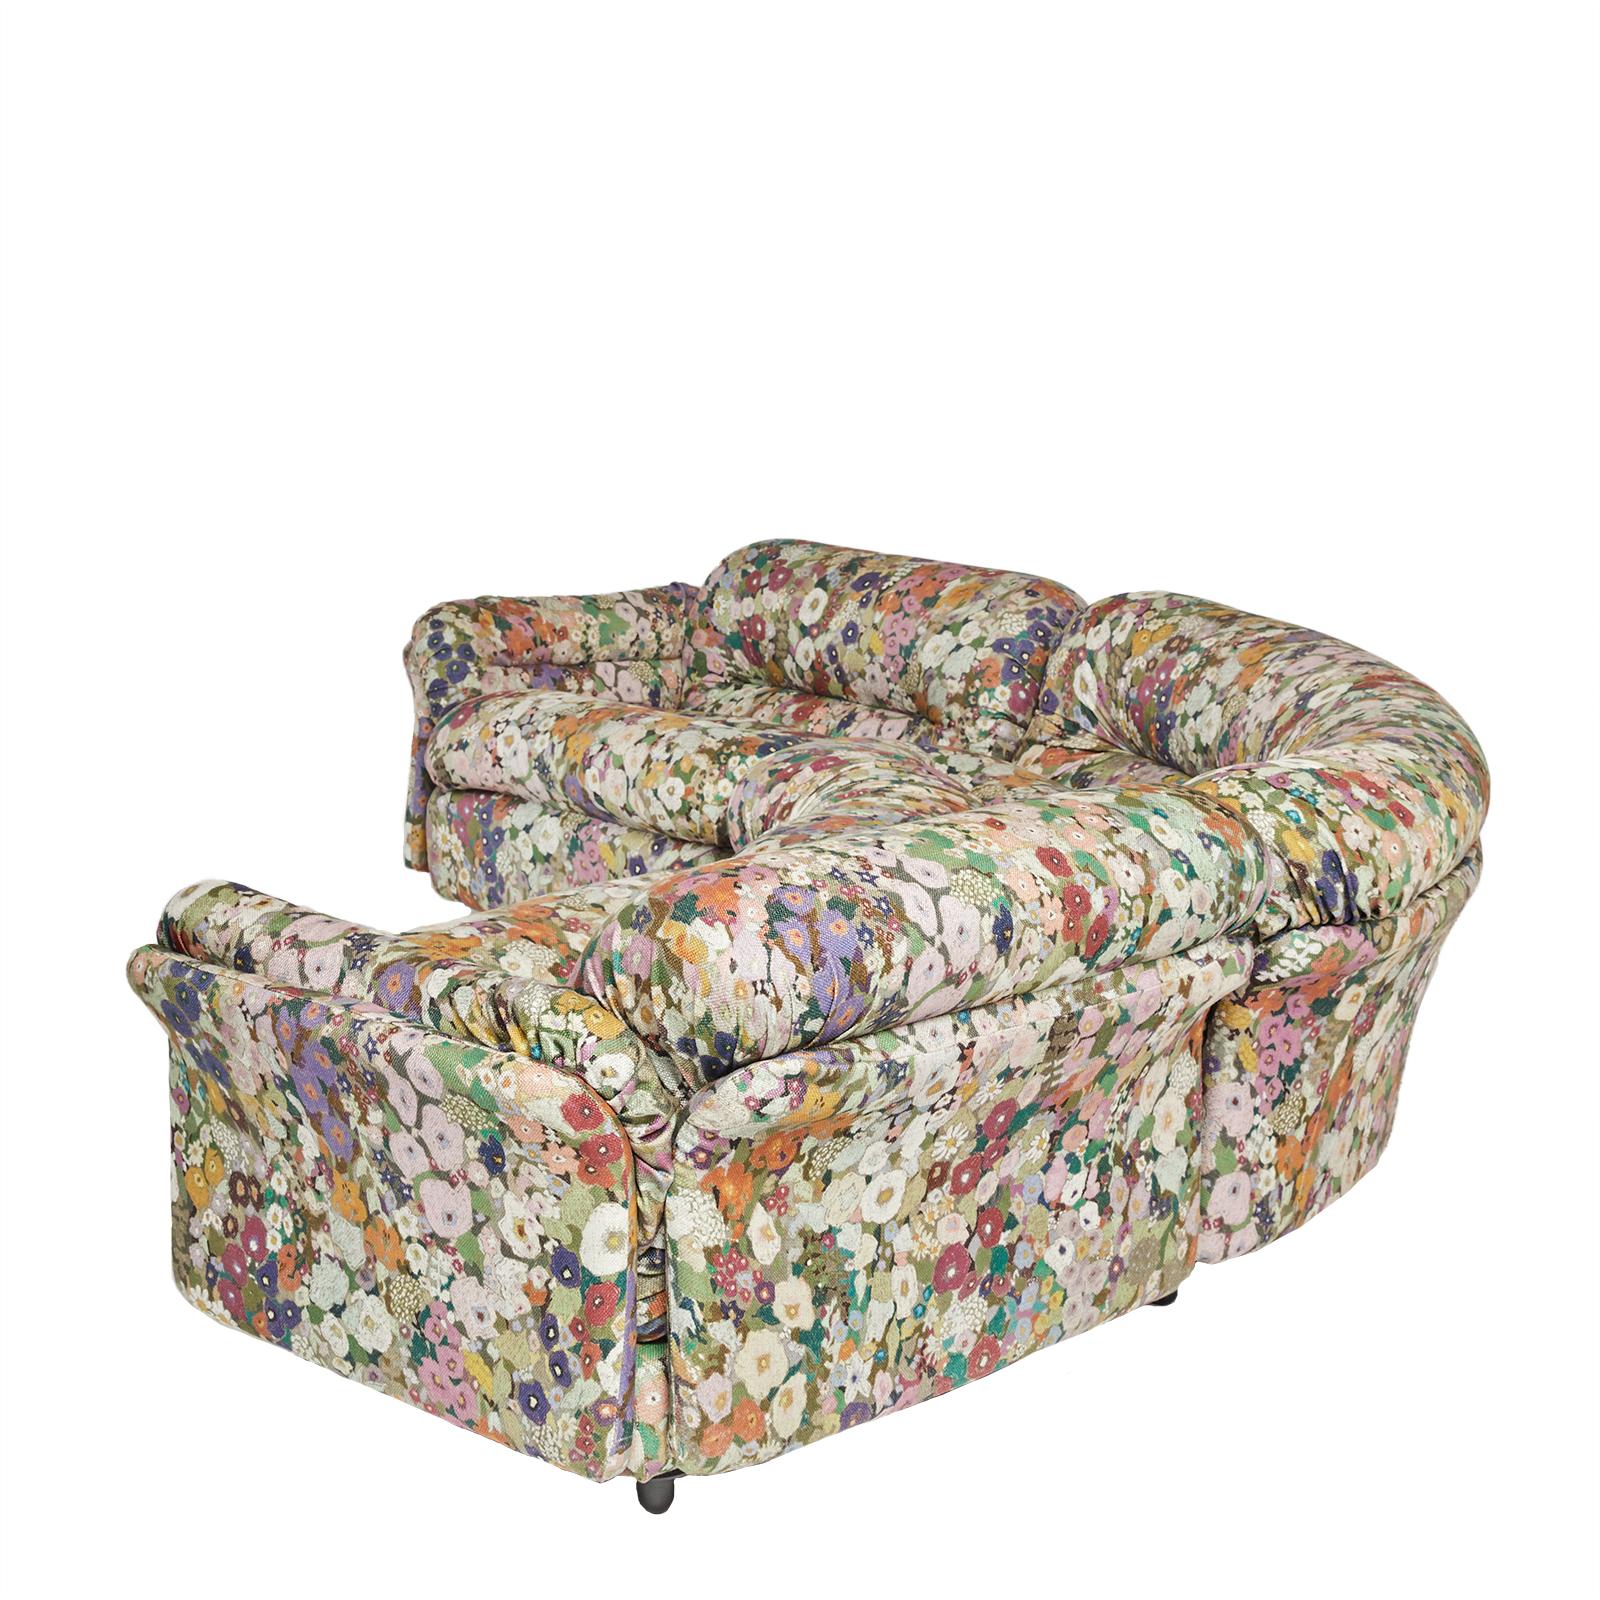 Rest upon a bed of wildflowers with the Grandangolo sofa. An icon of postmodern design, this 1960s modular piece by Titiana Ammannati & Giampiero Vitelli for Rossi Di Albizzate has been reupholstered in the spring florals of House of Hackney’s